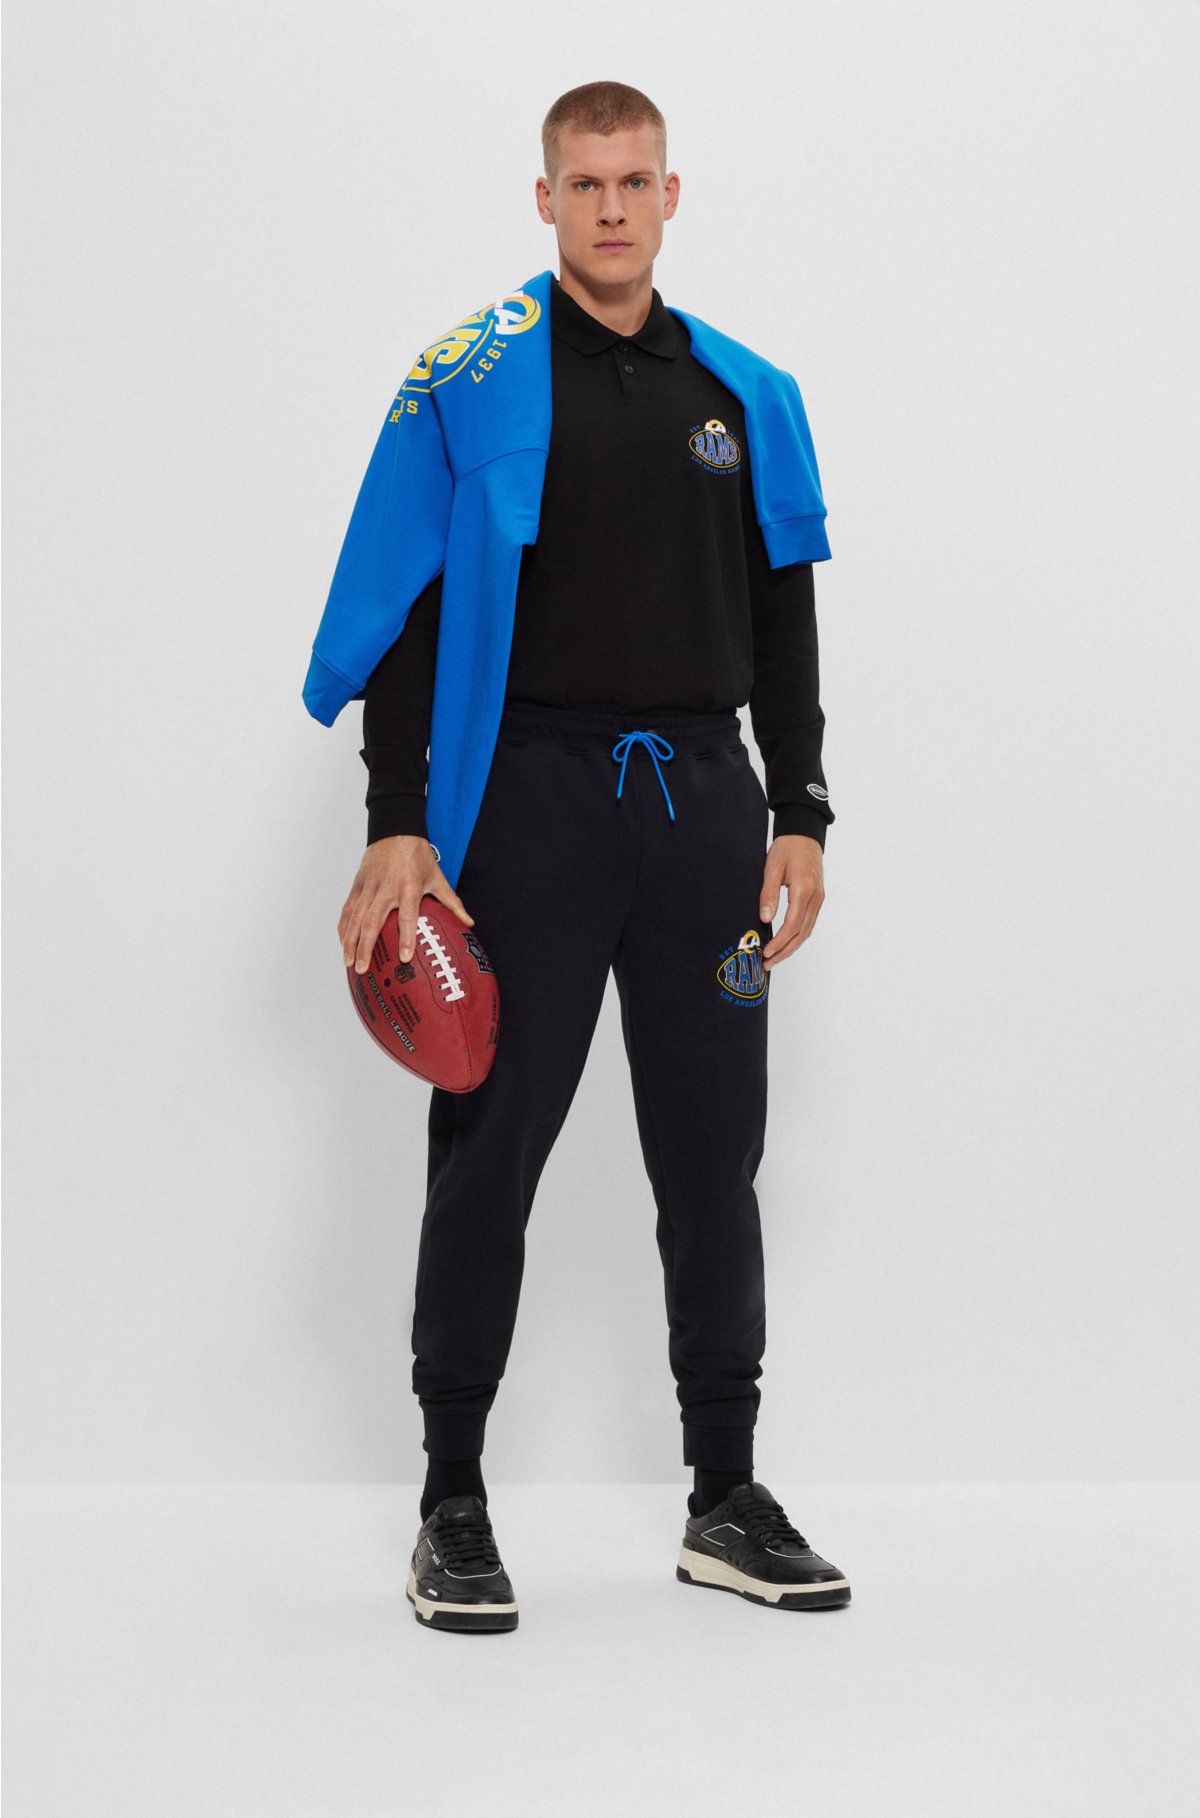 BOSS x NFL long-sleeved polo shirt with collaborative branding, Rams